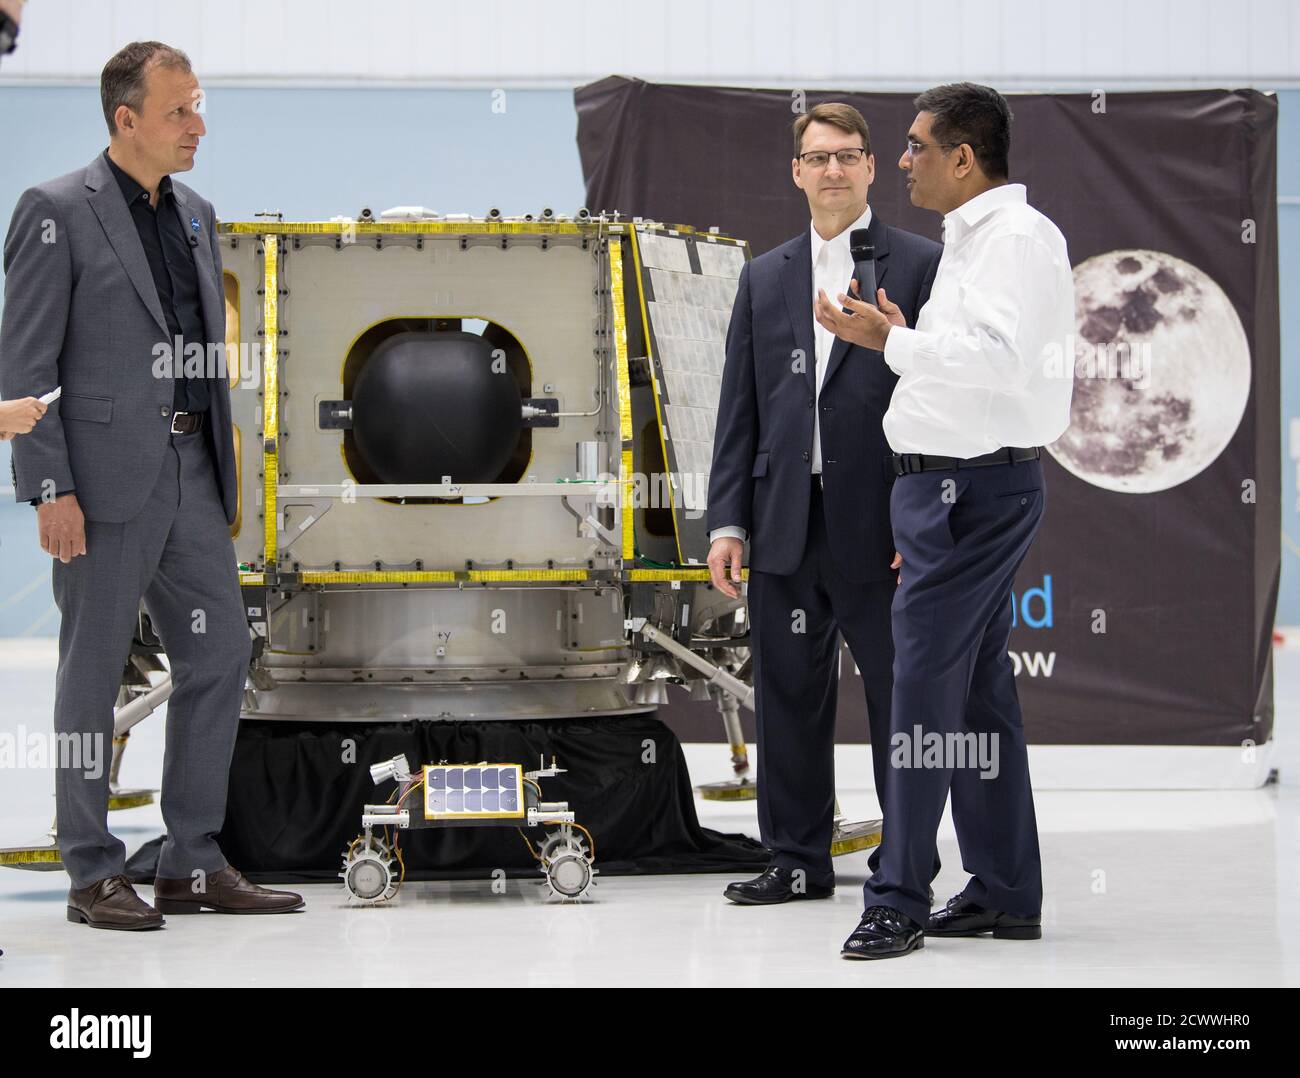 Commercial Lunar Payload Services Announcement NASA Associate Administrator, Science Mission Directorate, Thomas Zurbuchen, left, speaks to, President and CEO of OrbitBeyond, Siba Padhi, right, and Chief Science Officer, OrbitBeyond, Jon Morse, about their lunar lander, Friday, May 31, 2019, at Goddard Space Flight Center in Md. Astrobotic, Intuitive Machines, and Orbit Beyond have been selected to provide the first lunar landers for the Artemis program's lunar surface exploration. ' Stock Photo